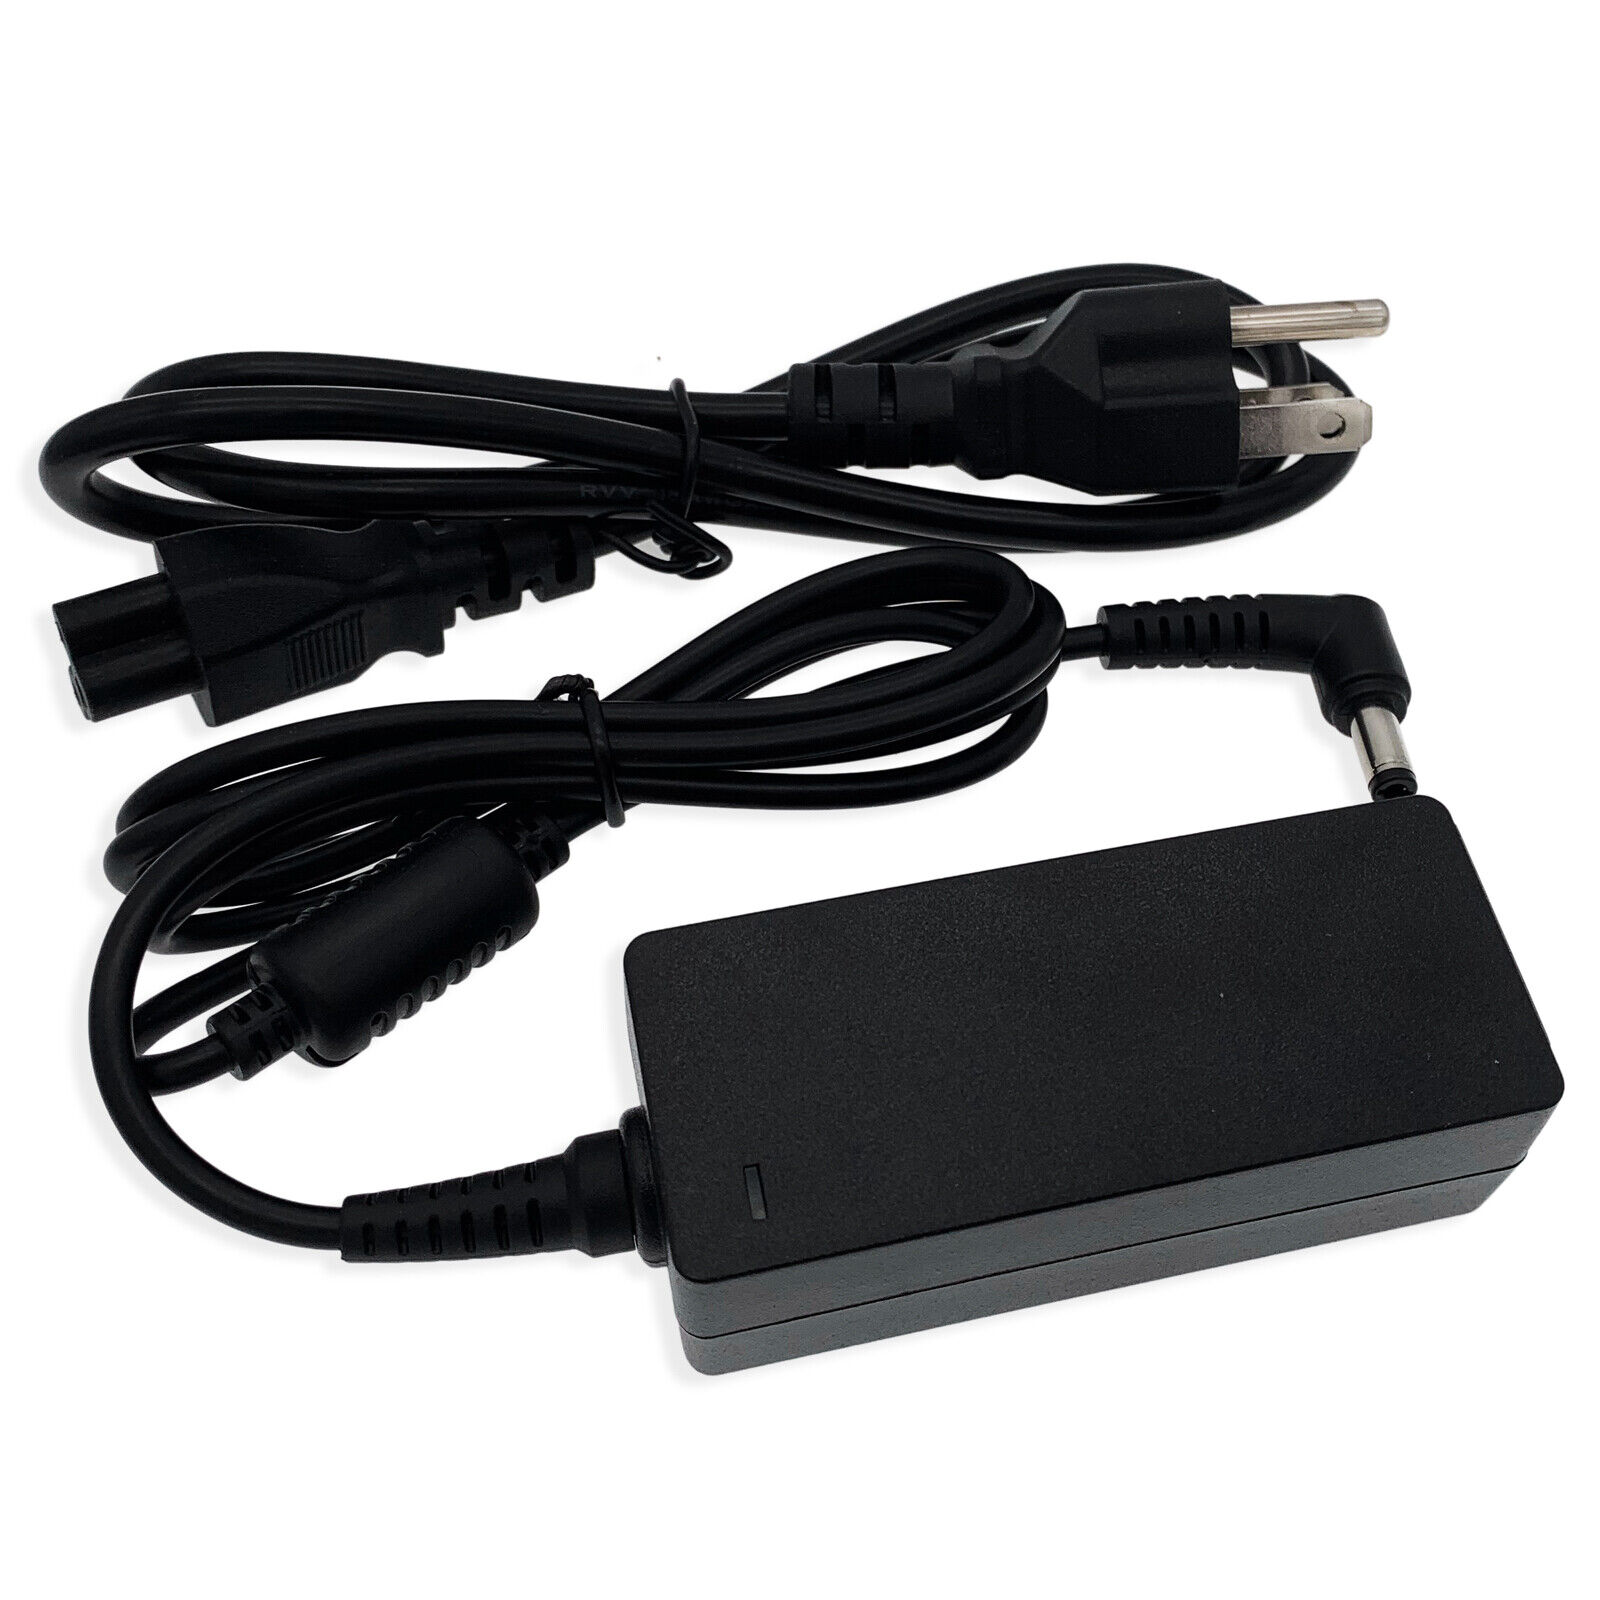 18V AC Adapter For Cricut Expression 2 Die Cutting Machine Craft CUT Power Cord Compatible Brand For Cricut Power Supp